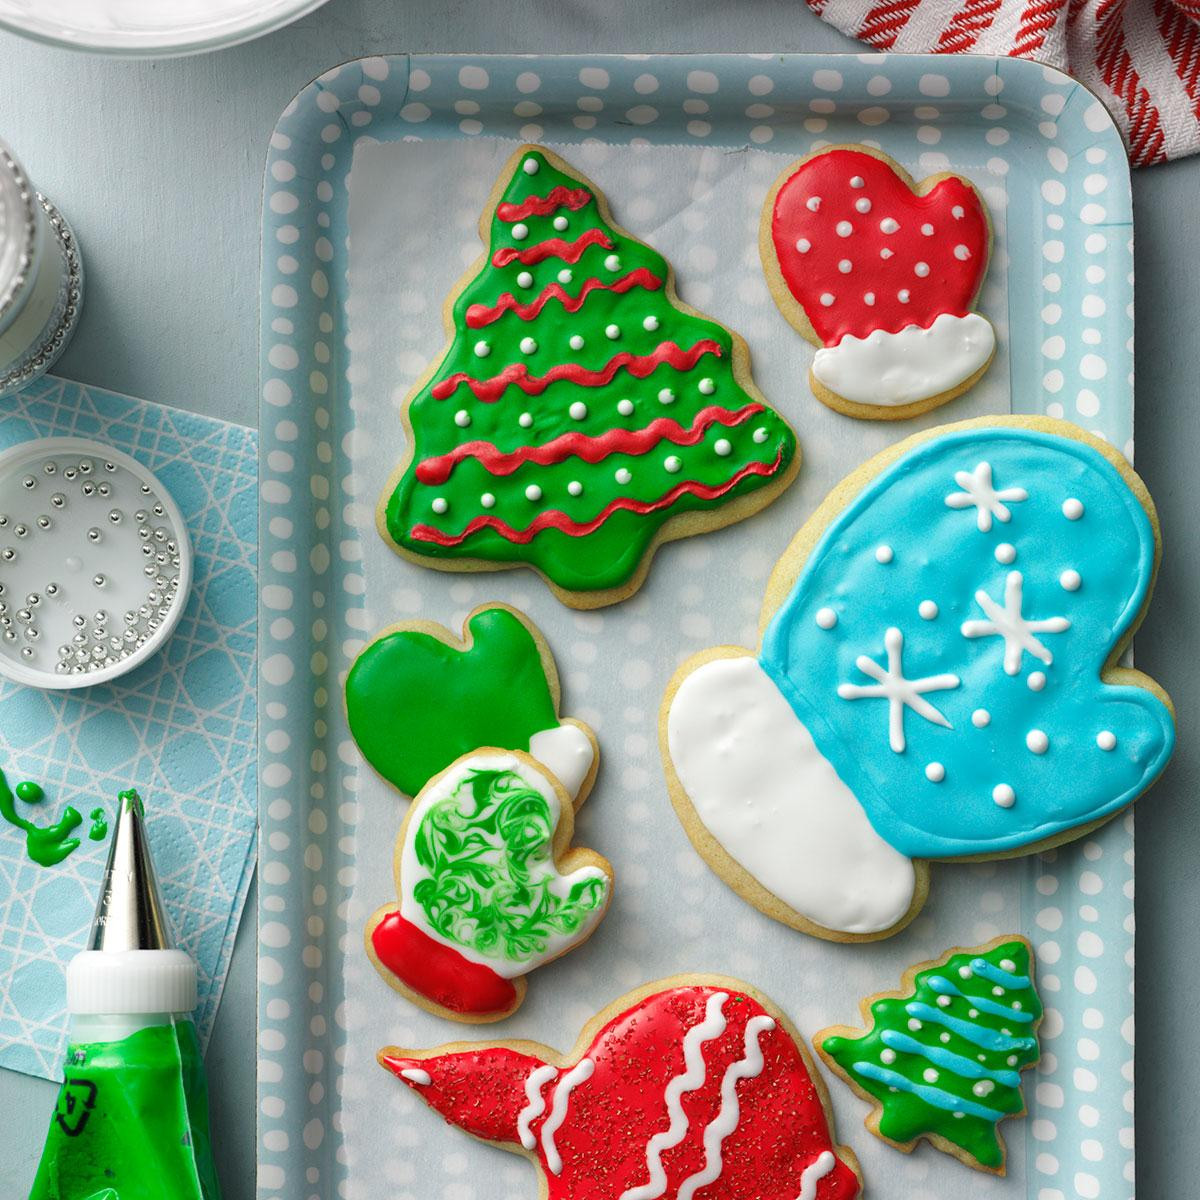 Frosting For Christmas Cutout Cookies
 Holiday Cutout Cookies Recipe